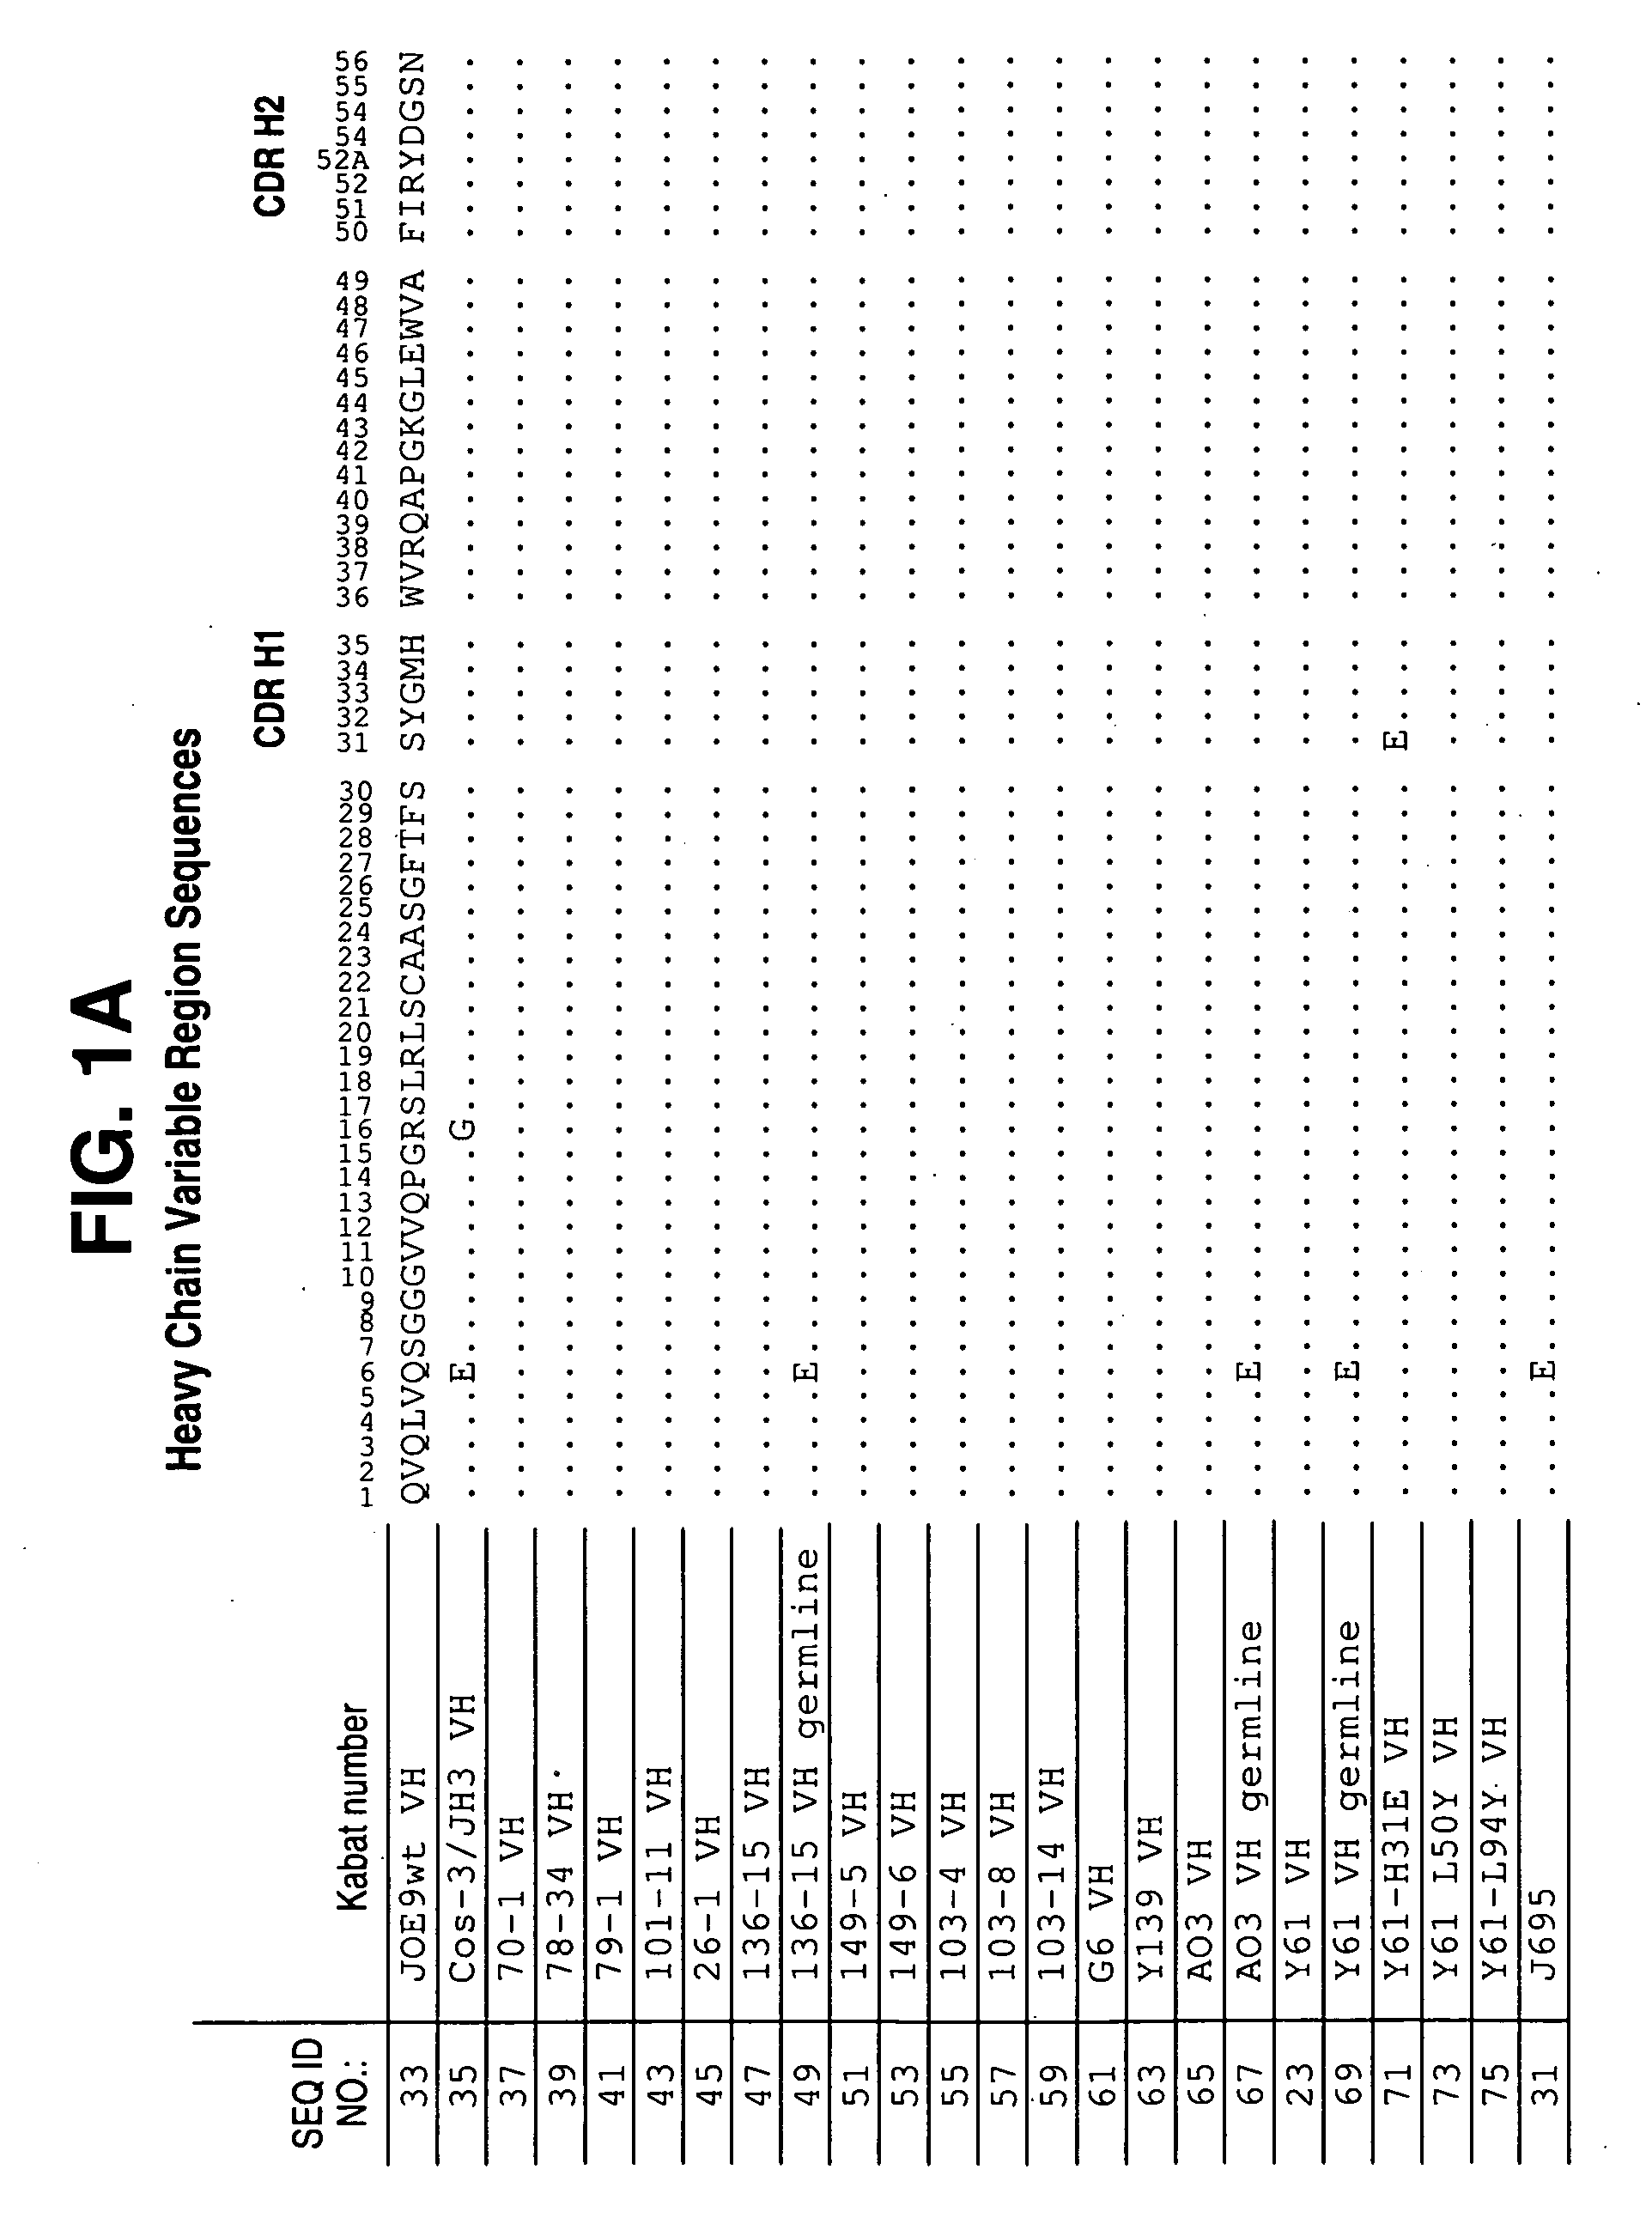 Human antibodies that bind human il-12 and methods for producing